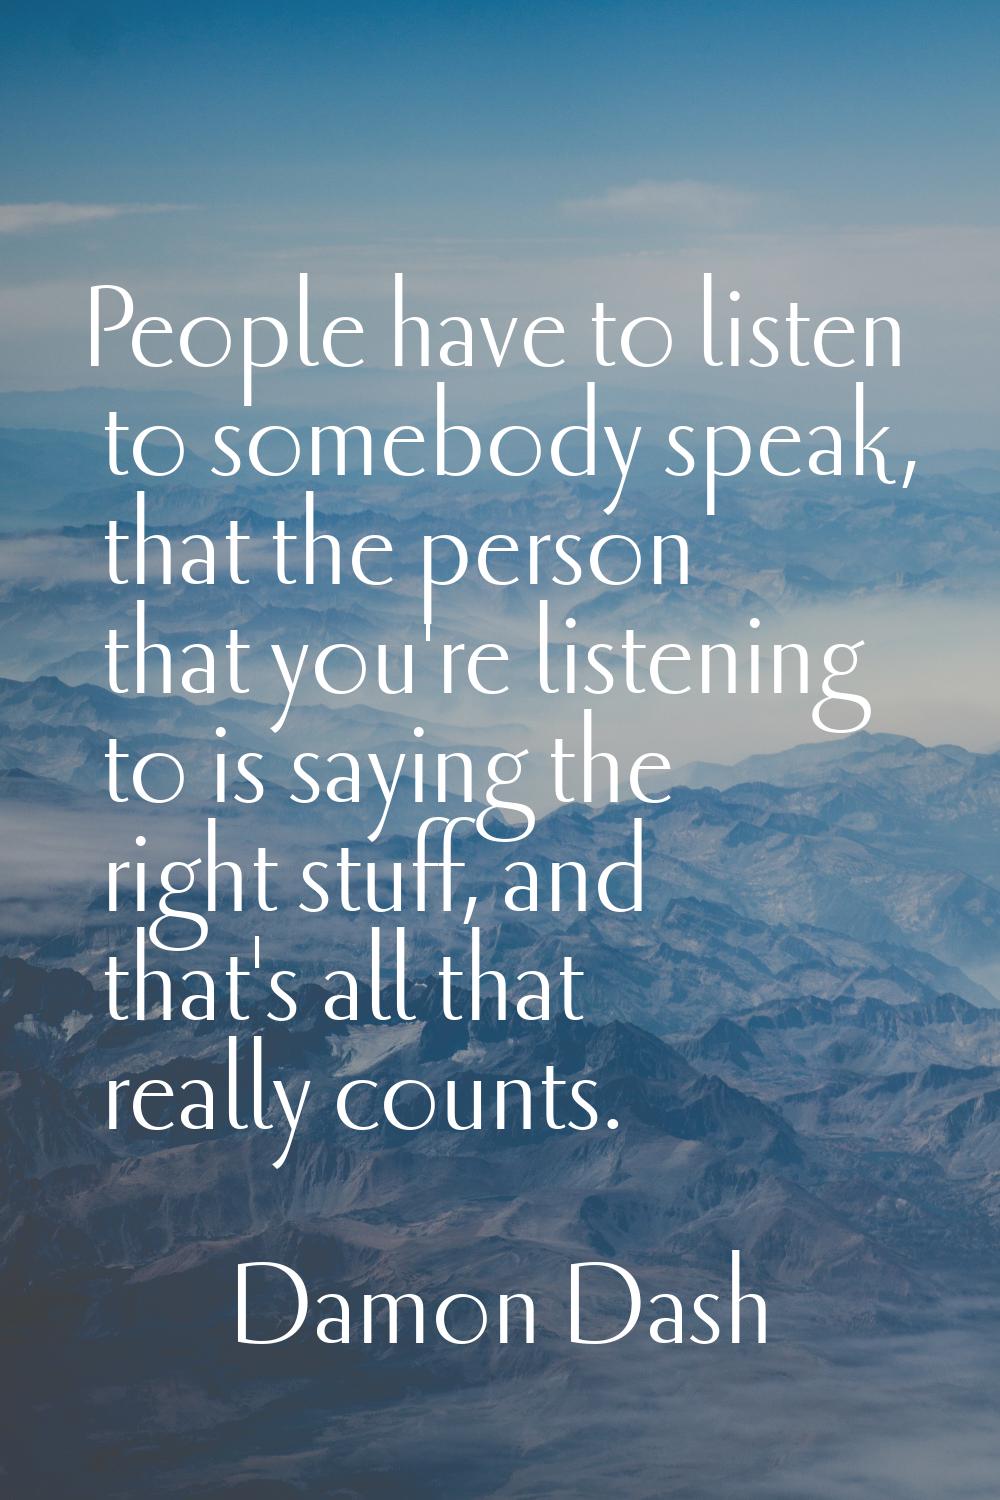 People have to listen to somebody speak, that the person that you're listening to is saying the rig